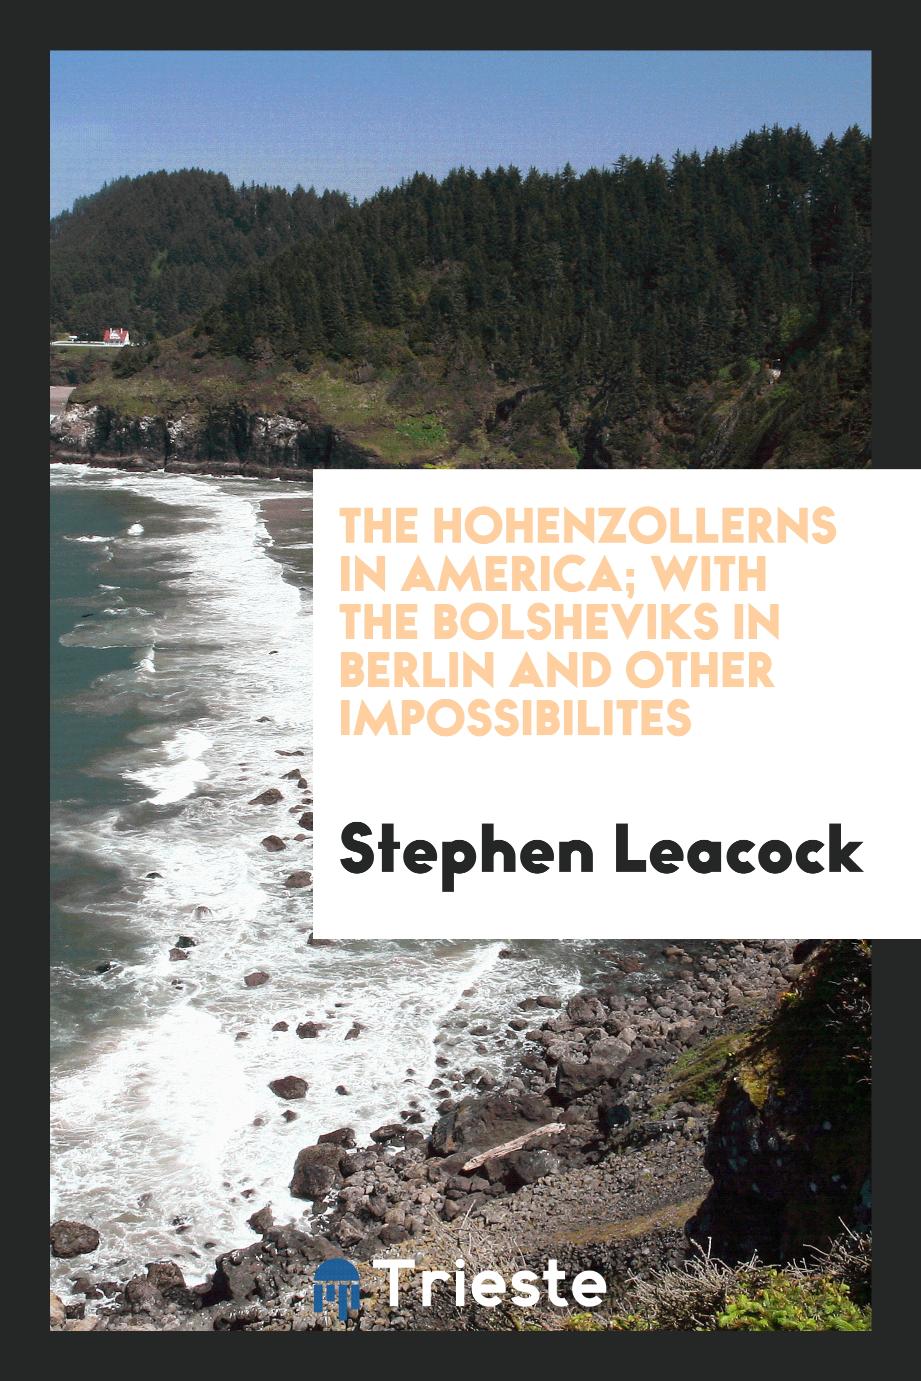 The Hohenzollerns in America; with the Bolsheviks in Berlin and other impossibilites